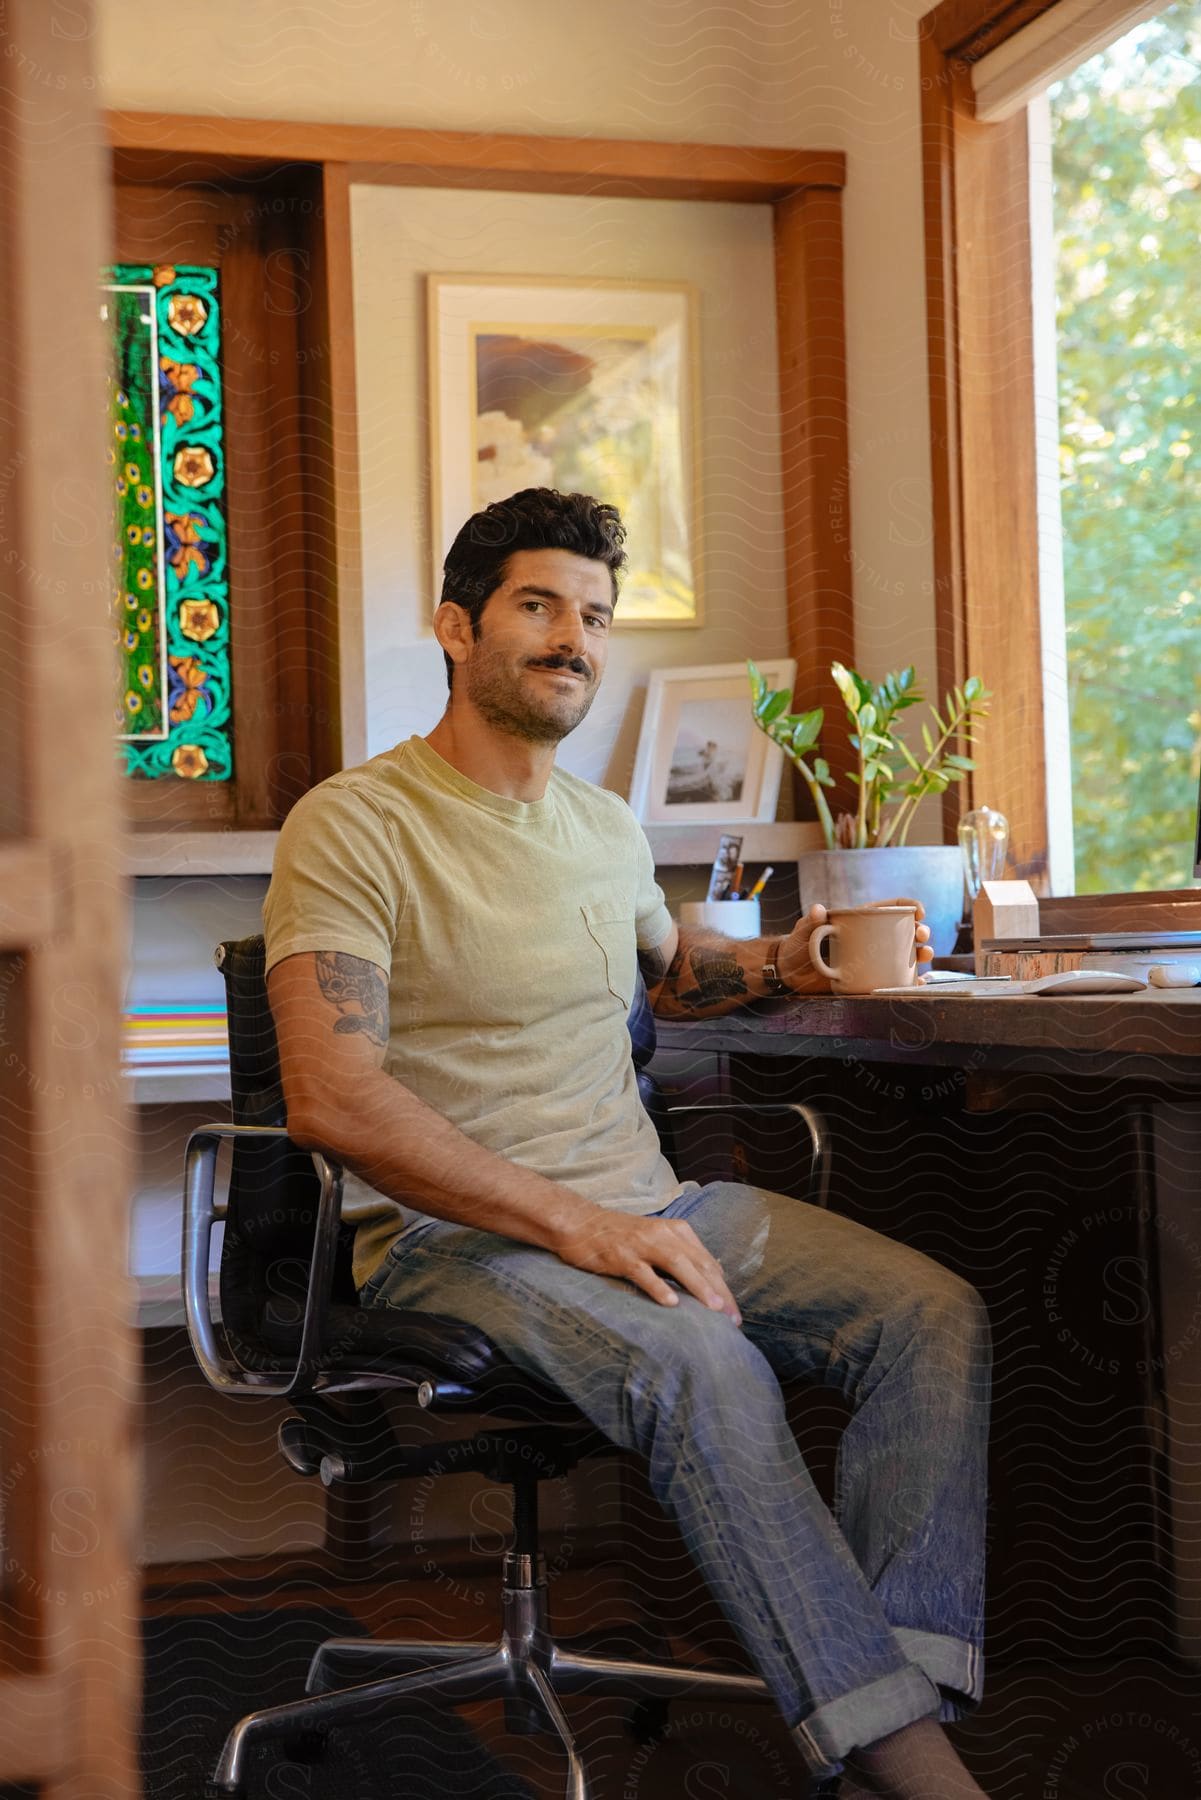 A man in jeans and a shirt sits at his home office desk, facing the camera, with a closed laptop and a cup of coffee in hand.